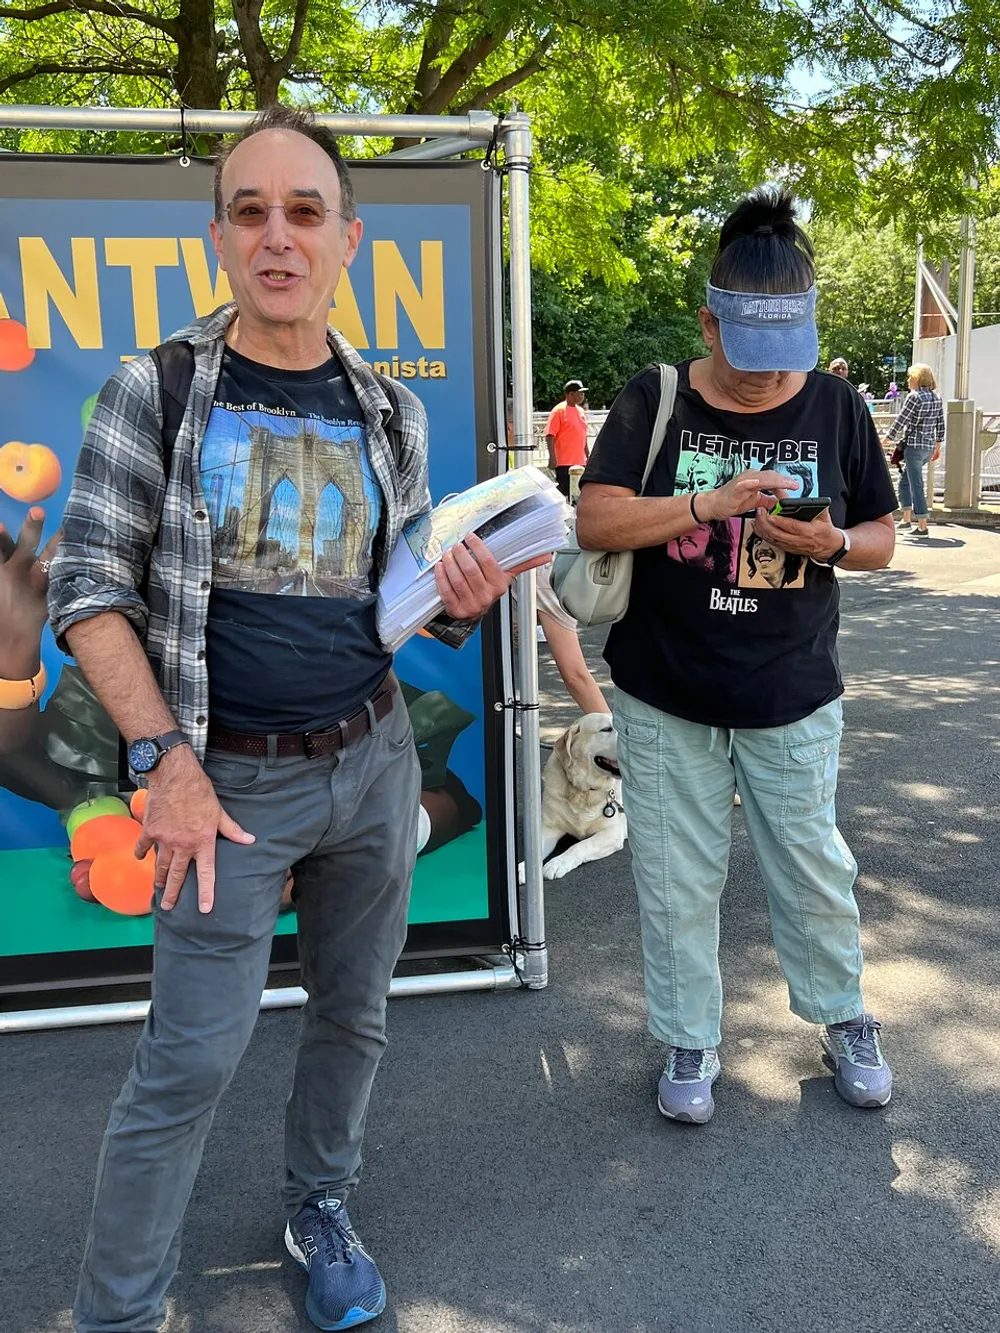 A man and a woman are standing next to each other with the man holding a stack of papers and the woman looking at her phone there is a dog and a sign with the text ANTWAN visible in the background